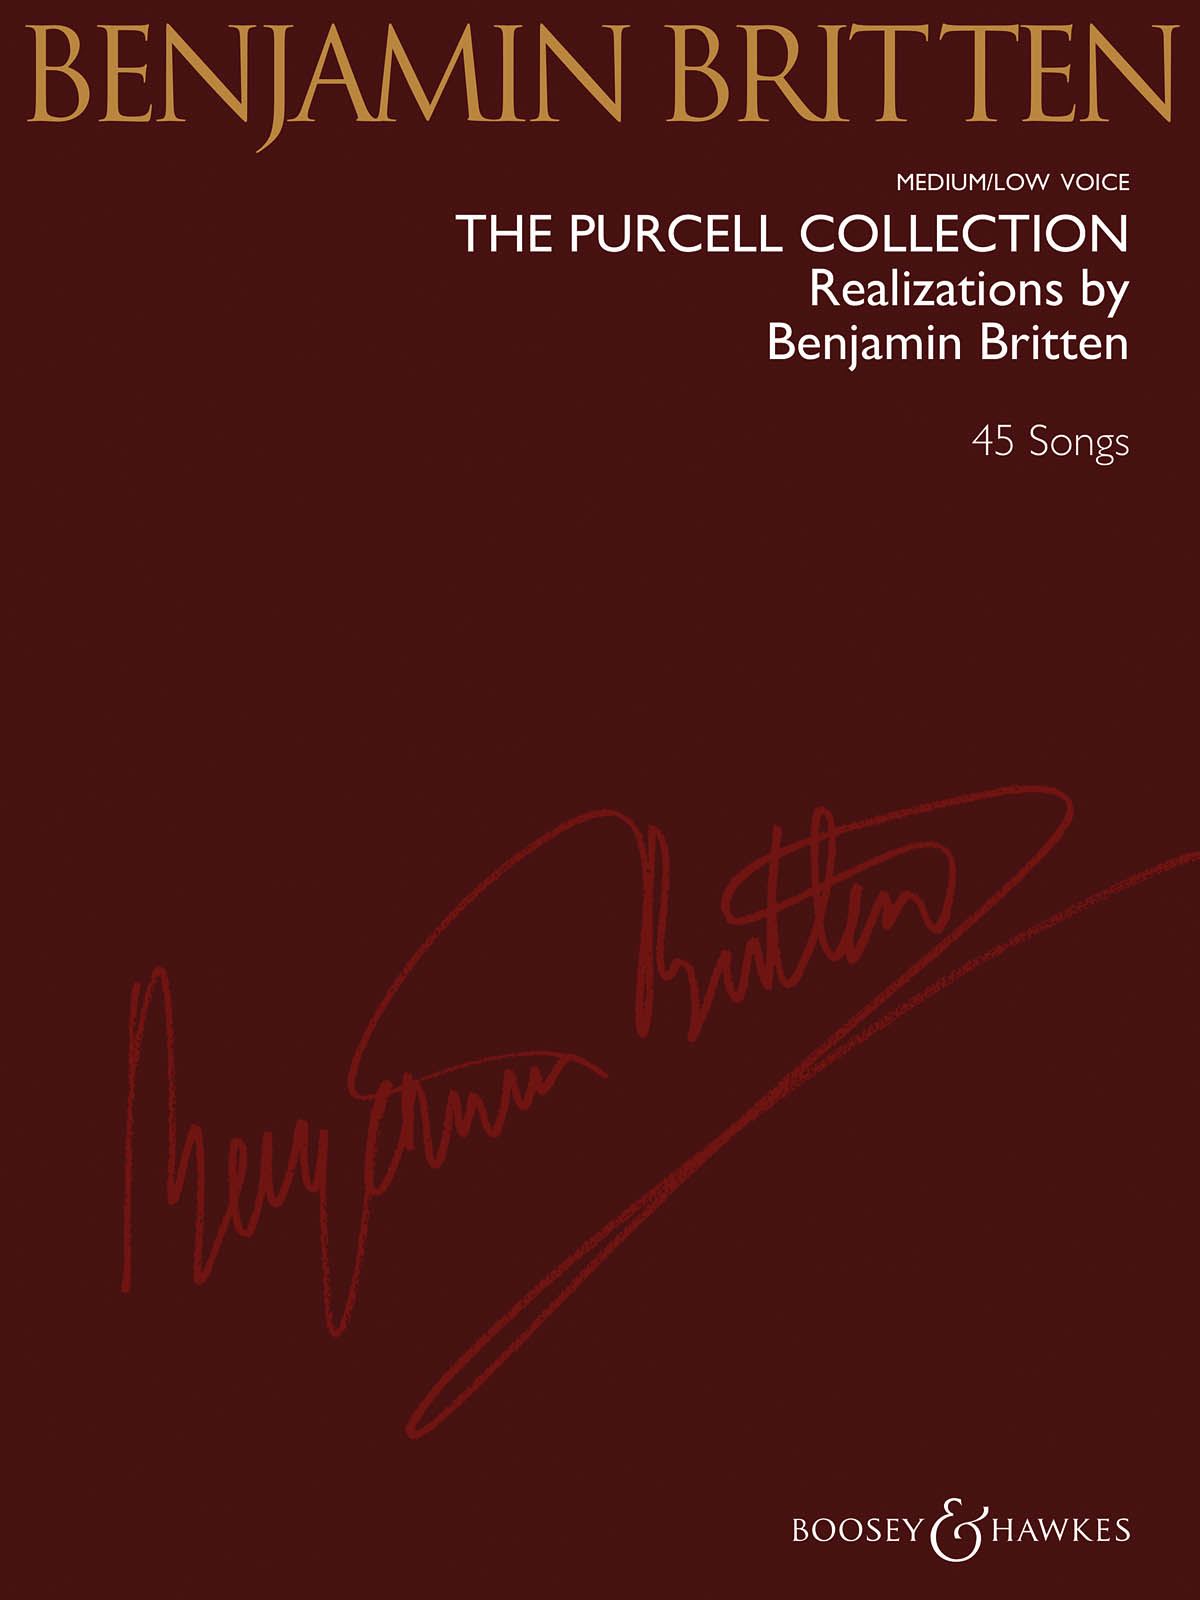 Henry Purcell: The Purcell Collection - Medium/Low Voice: Medium Voice: Vocal